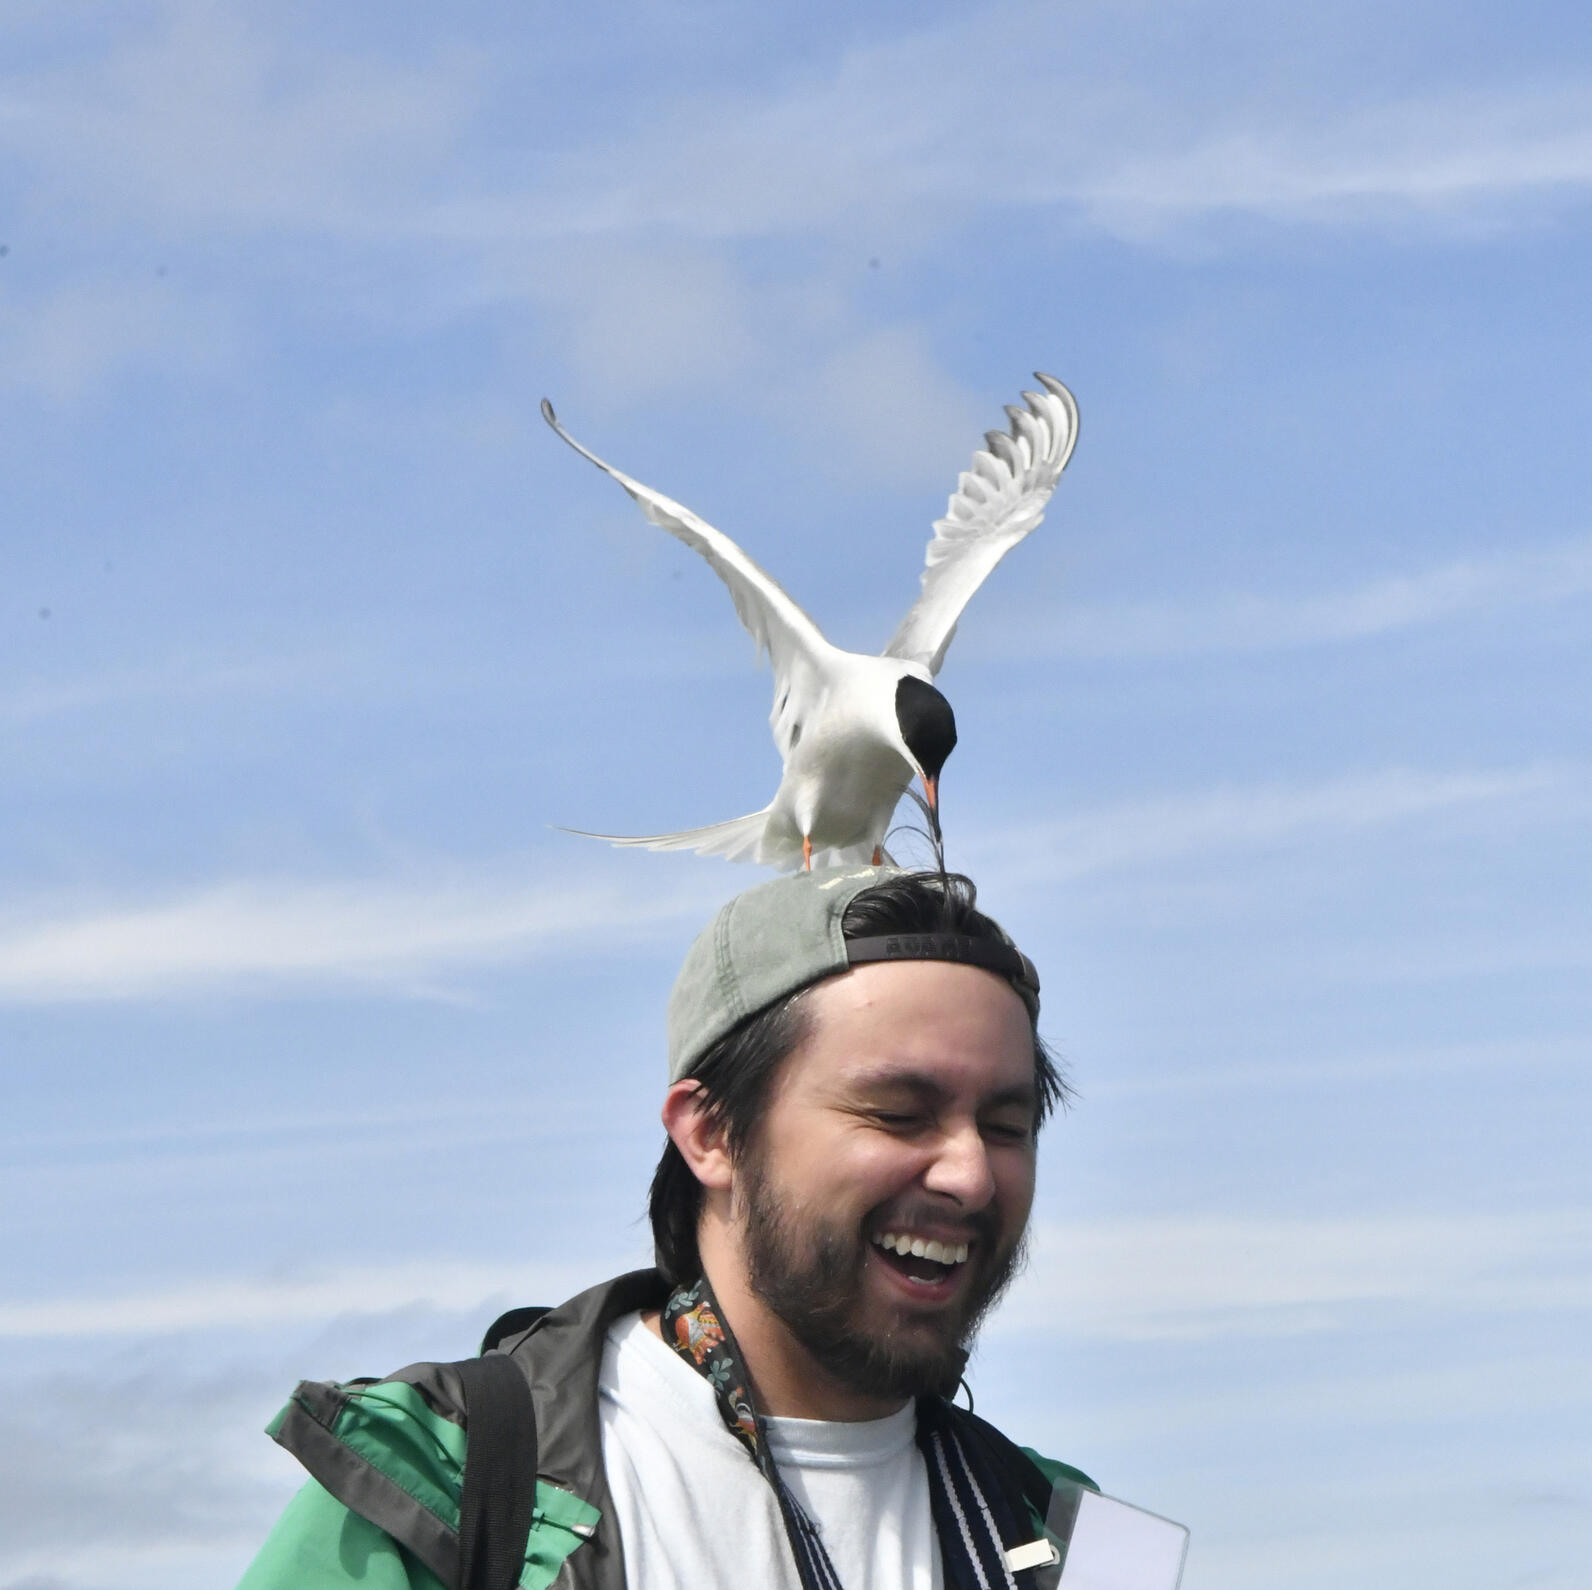 A Common Tern uses this camper's hat as a landing pad.